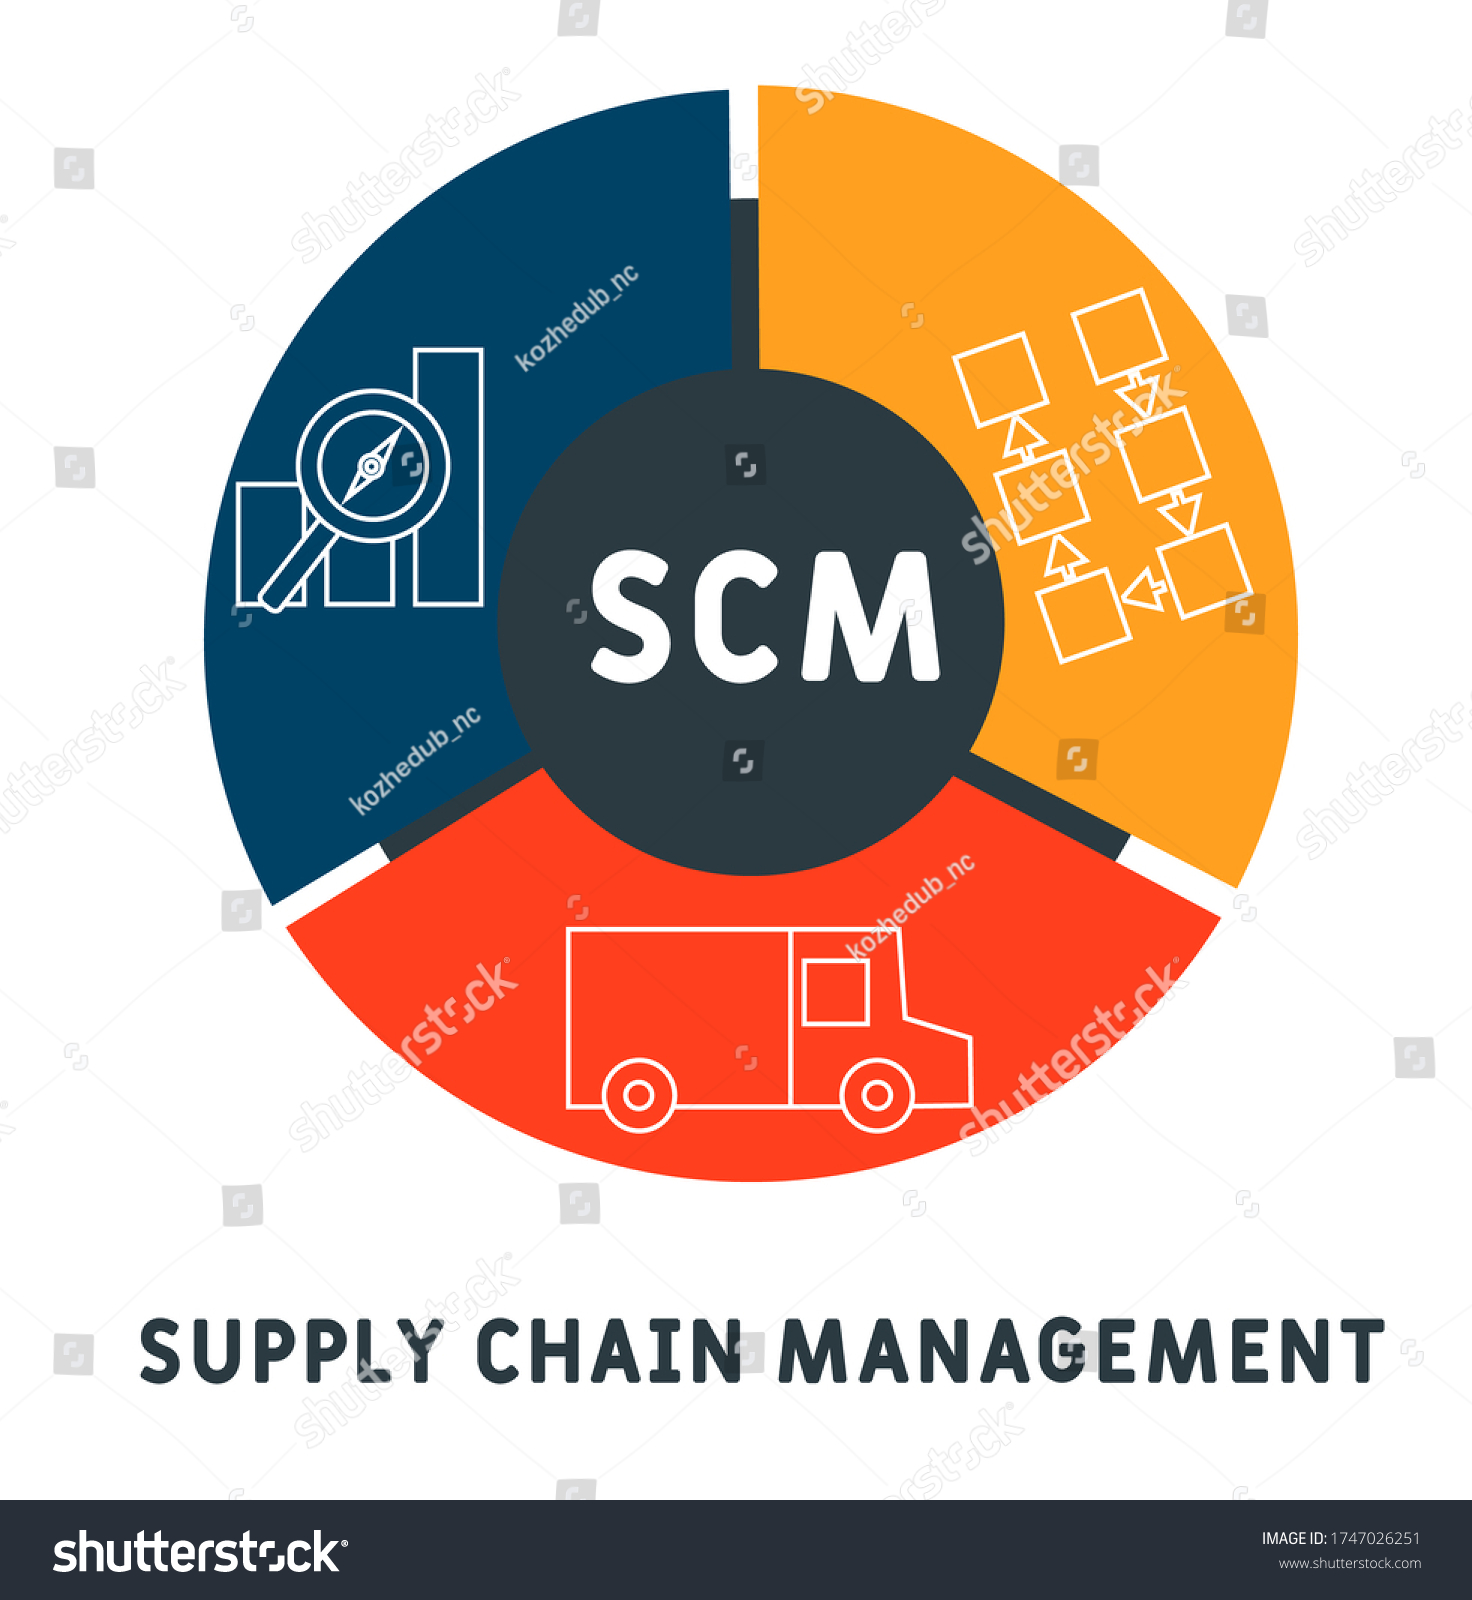 Scm Supply Chain Management Concept Banner Stock Vector Royalty Free 1747026251 Shutterstock 7574